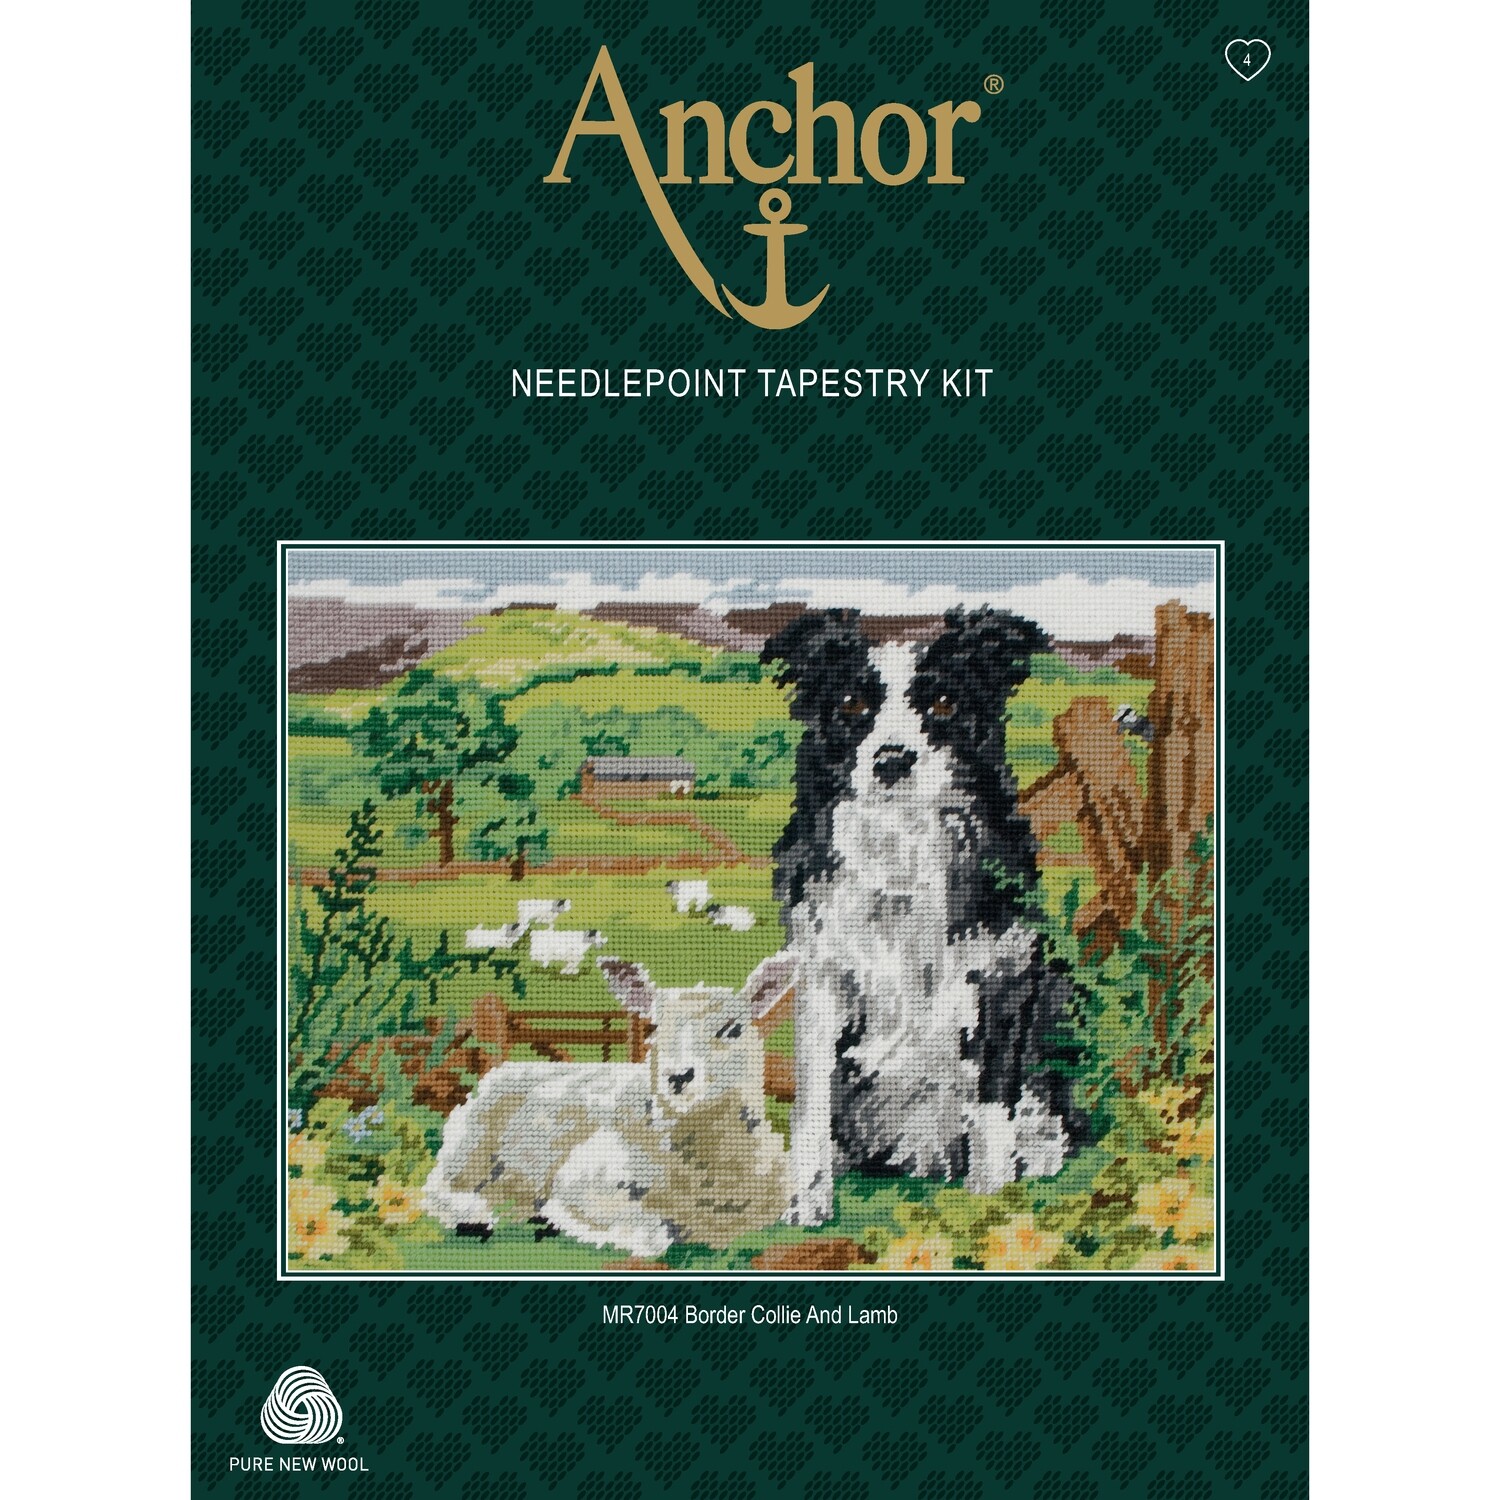 Anchor Essentials Tapestry Kit - Border Collie and Lamb